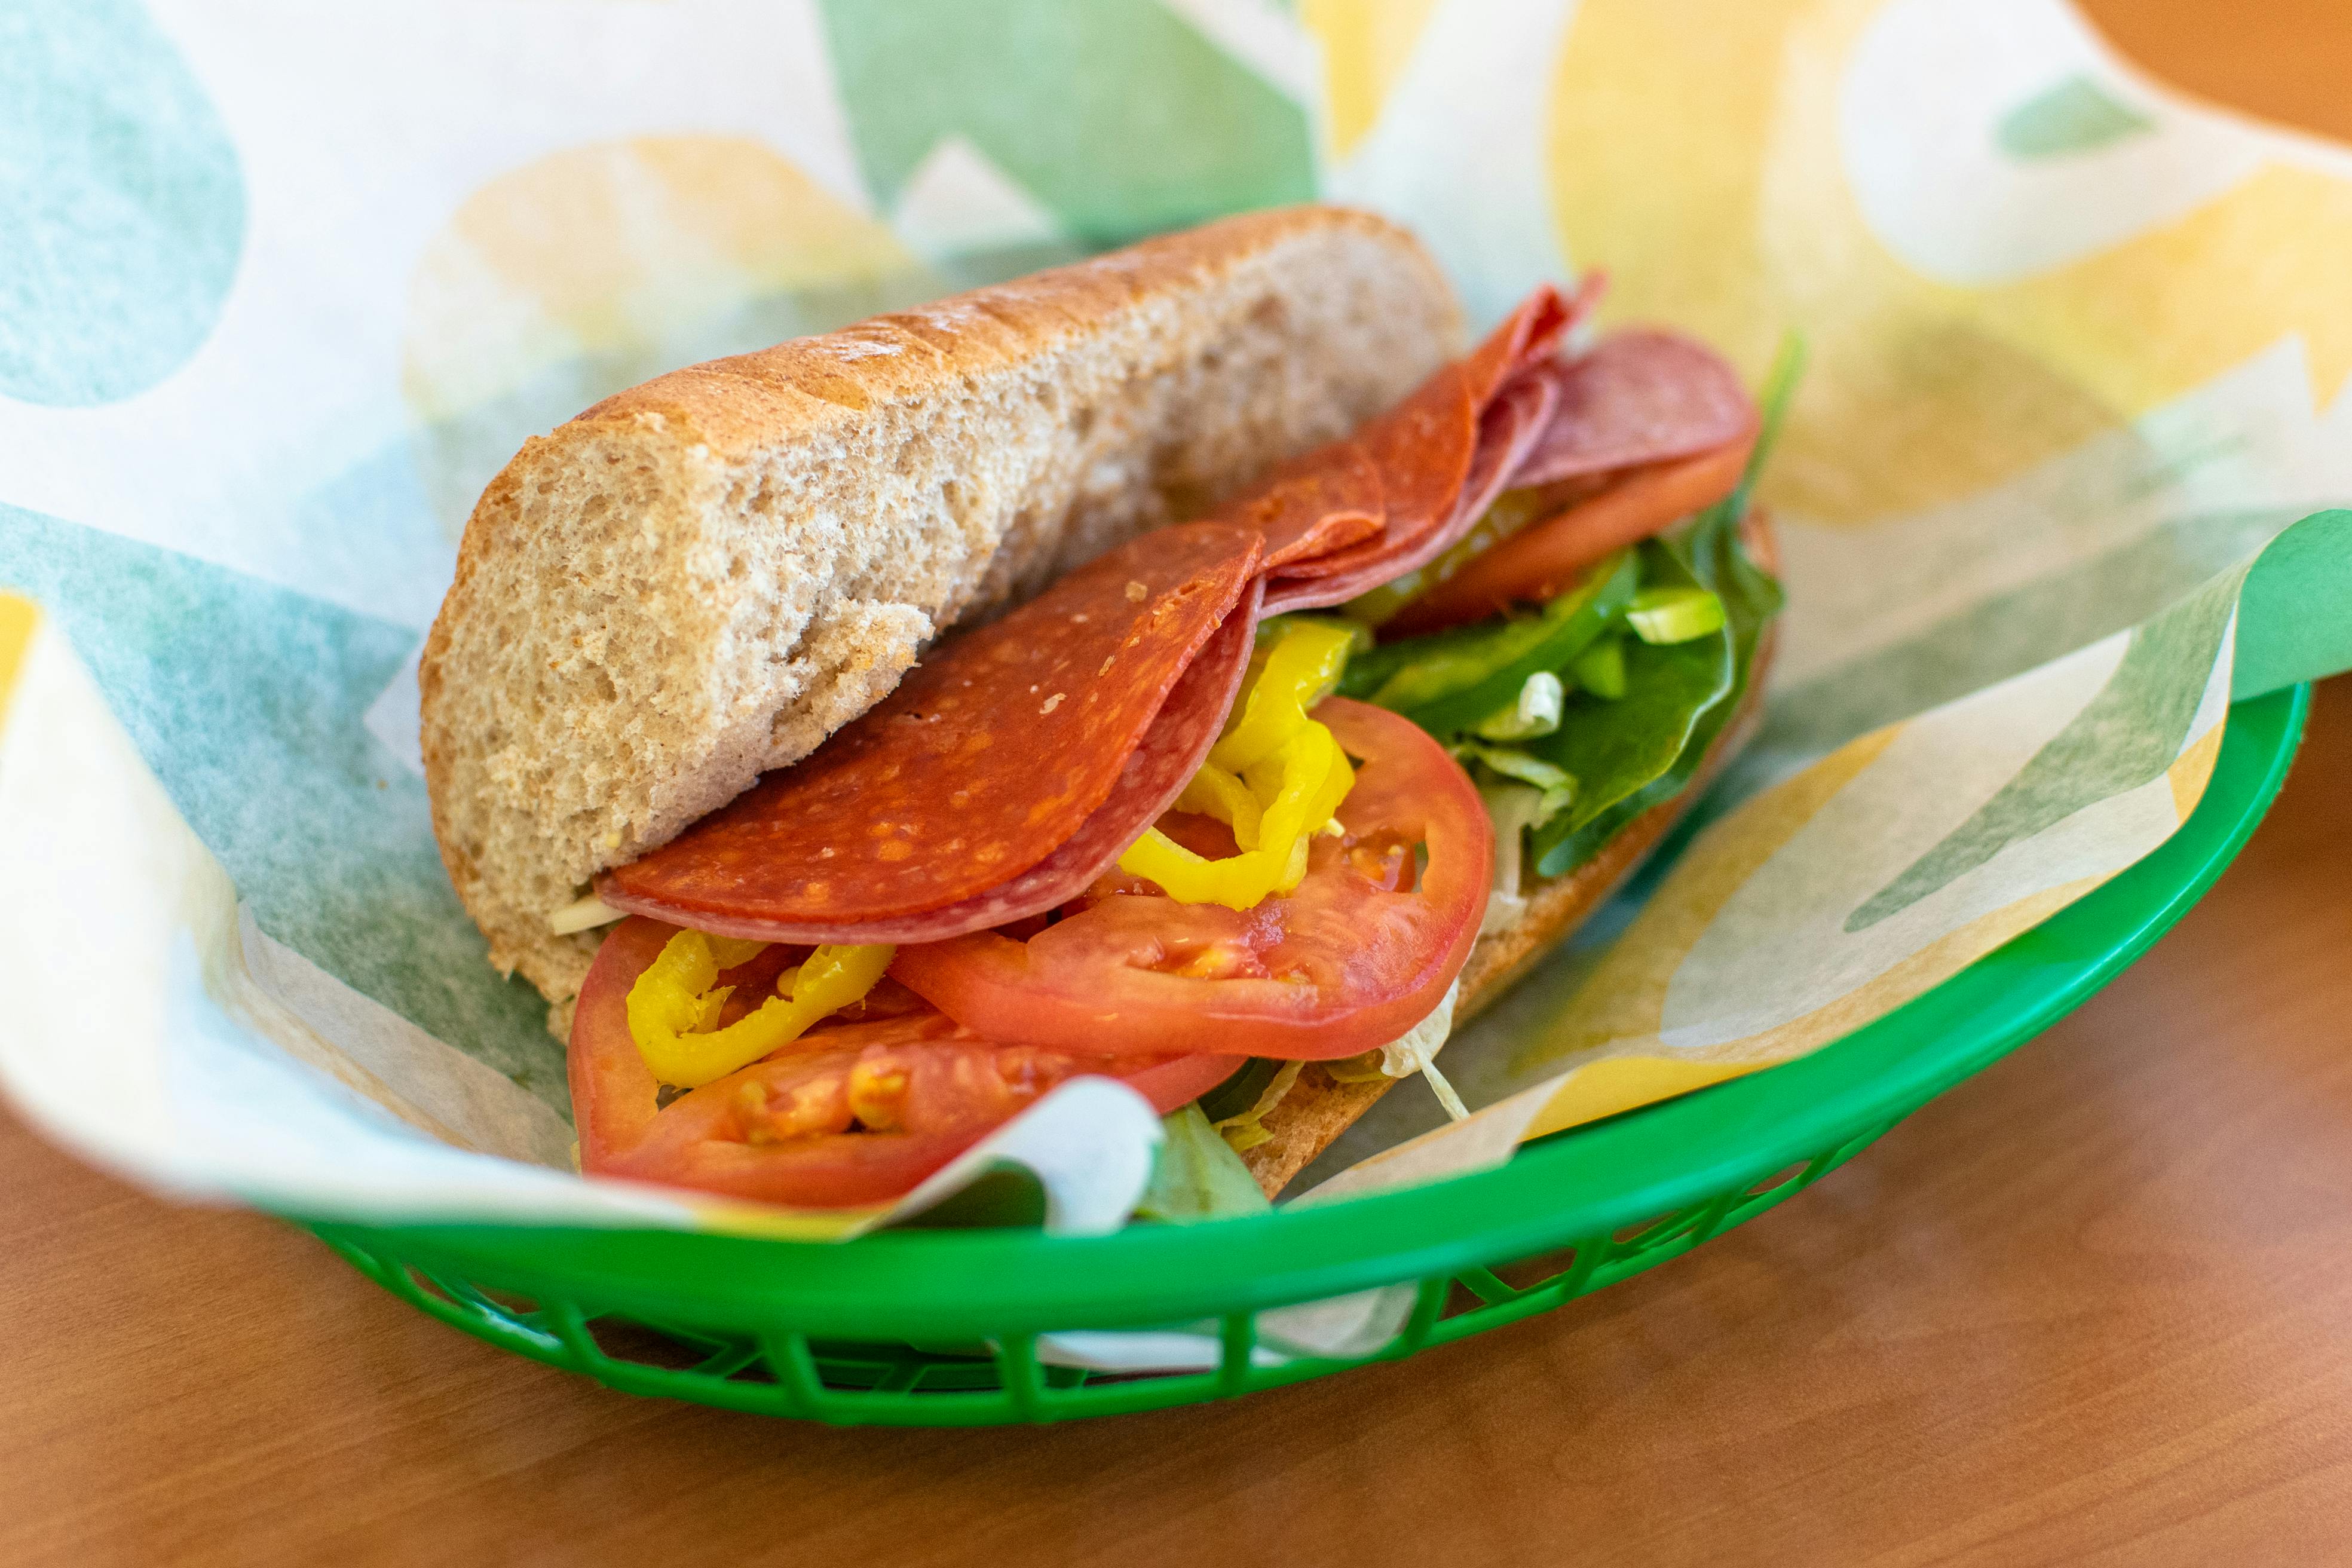 Subway - Lawrence 1540 W 6th St in Lawrence - Highlight